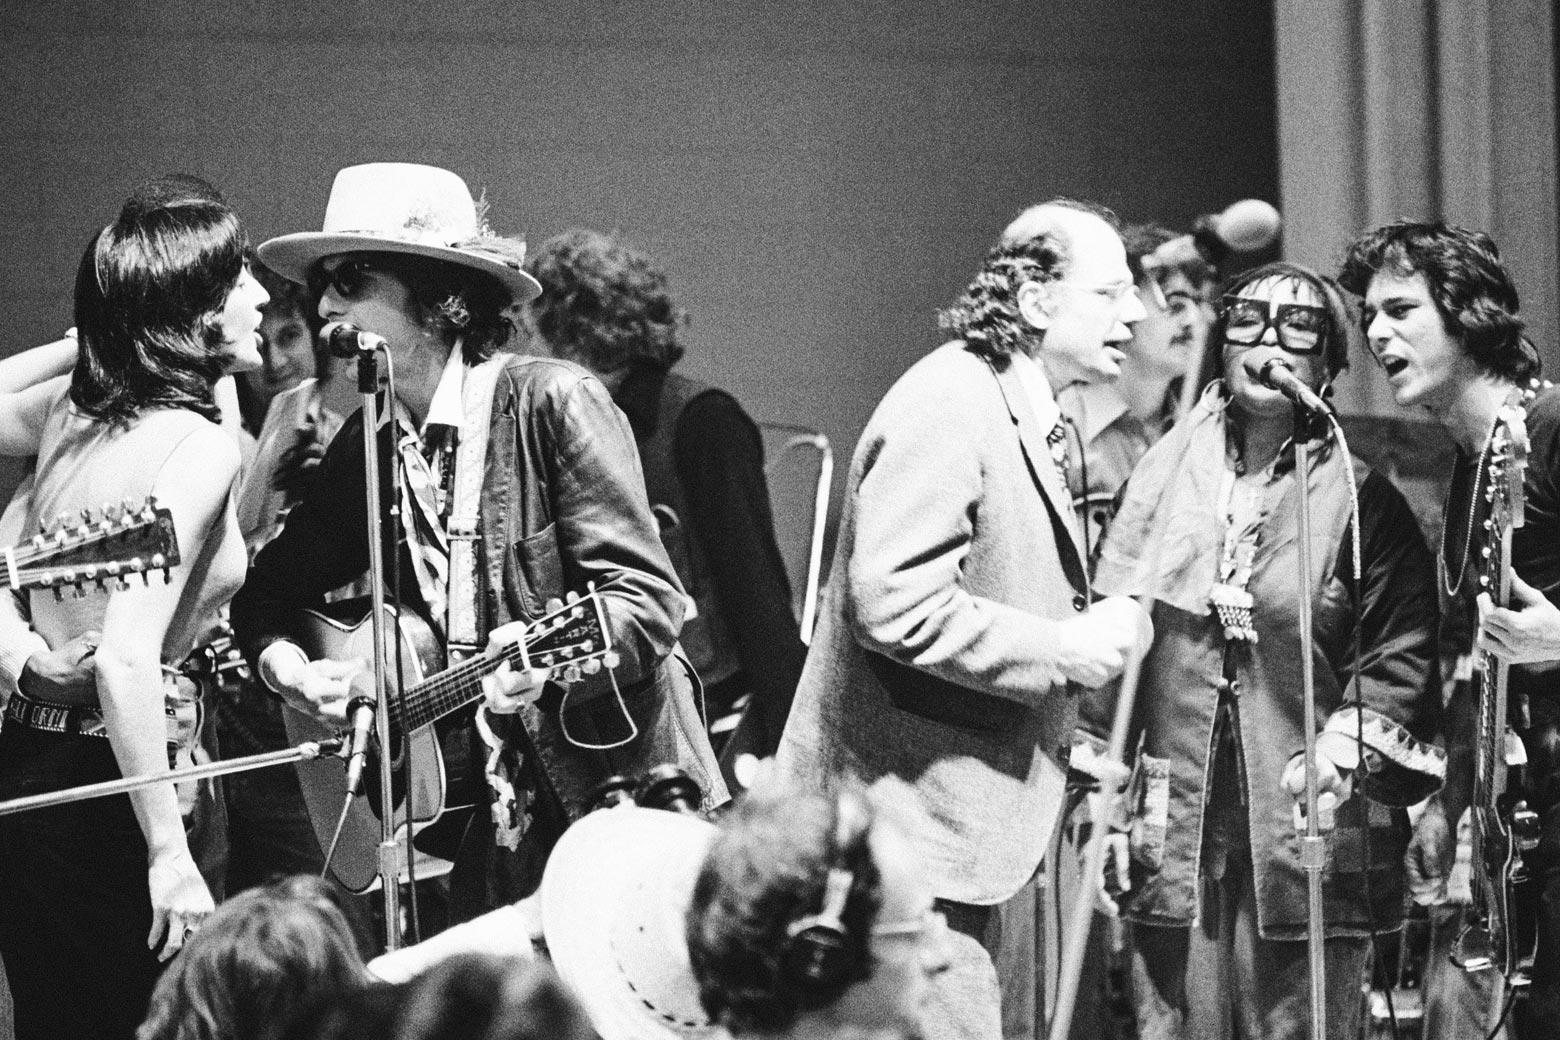 Baez and Dylan sing into one mic as Ginsberg and Flack sing into another during a performance